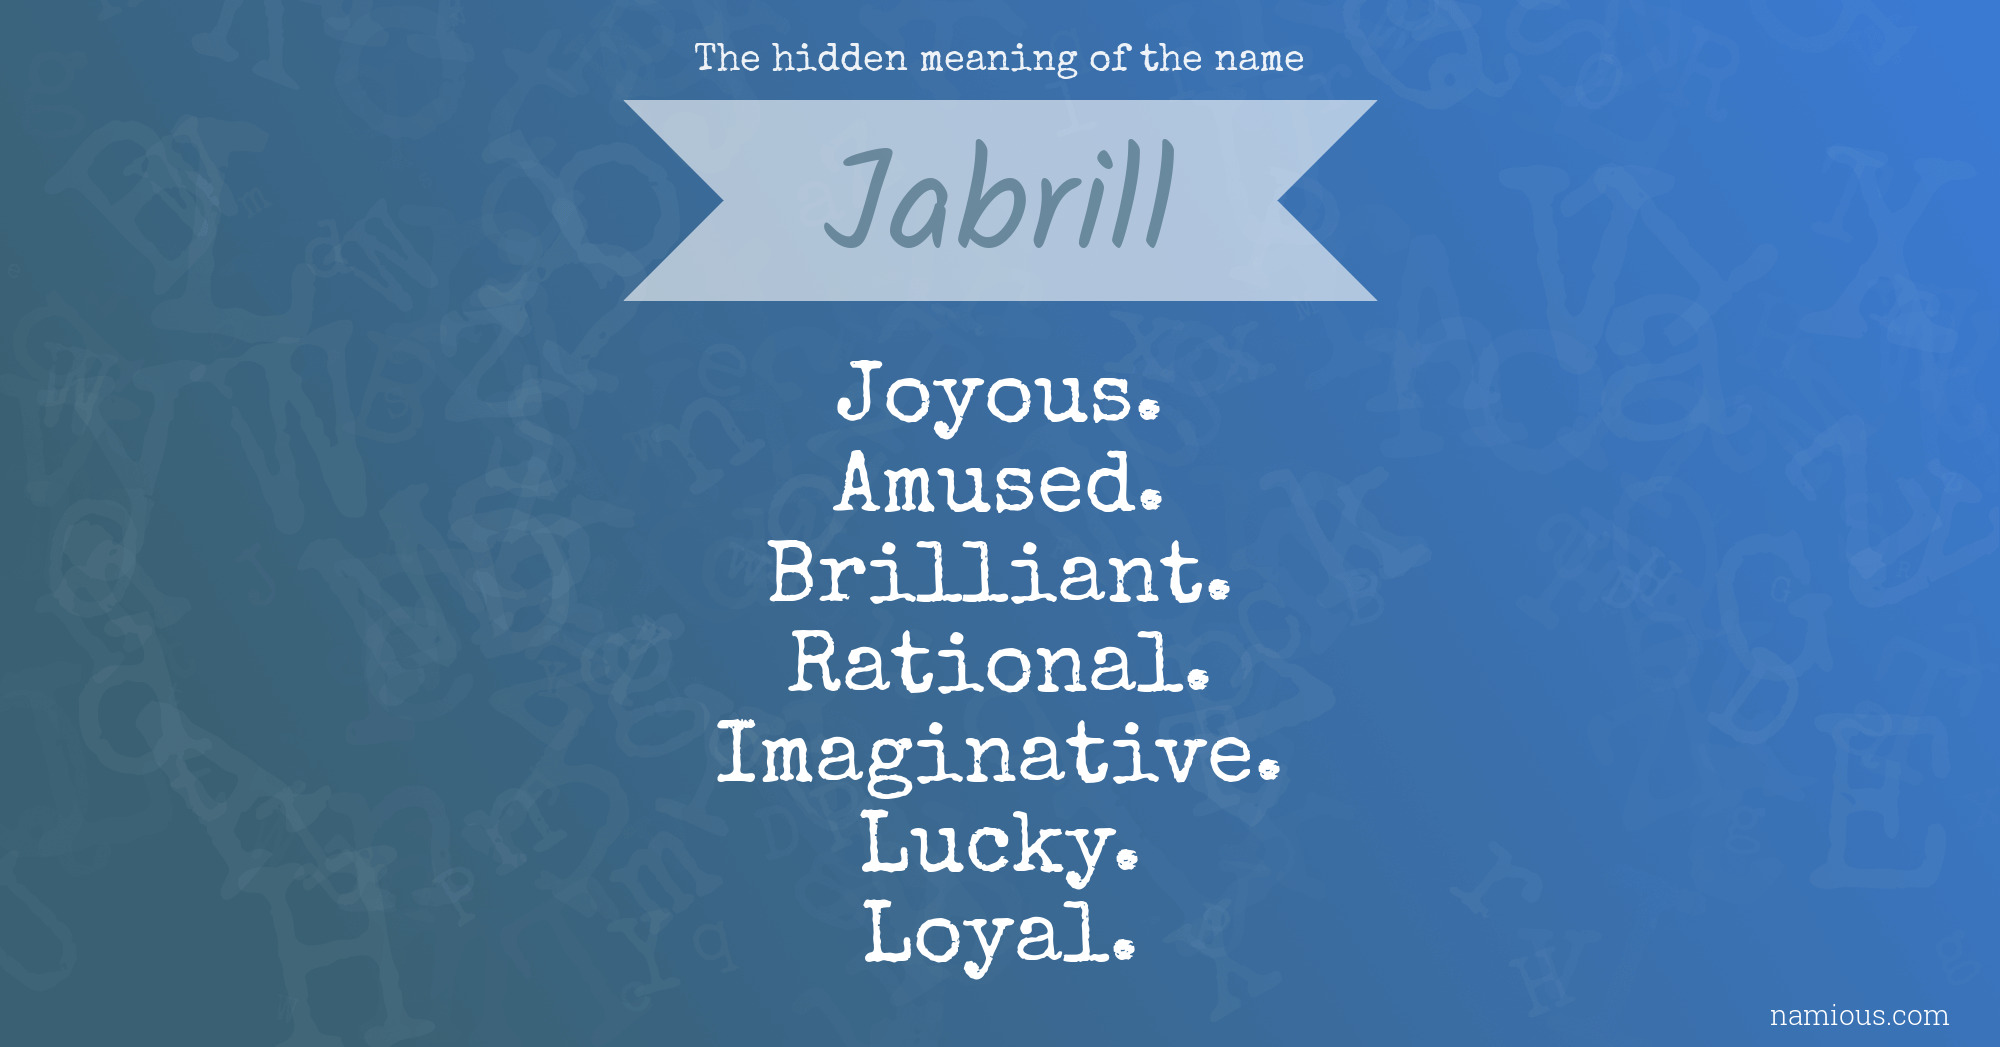 The hidden meaning of the name Jabrill